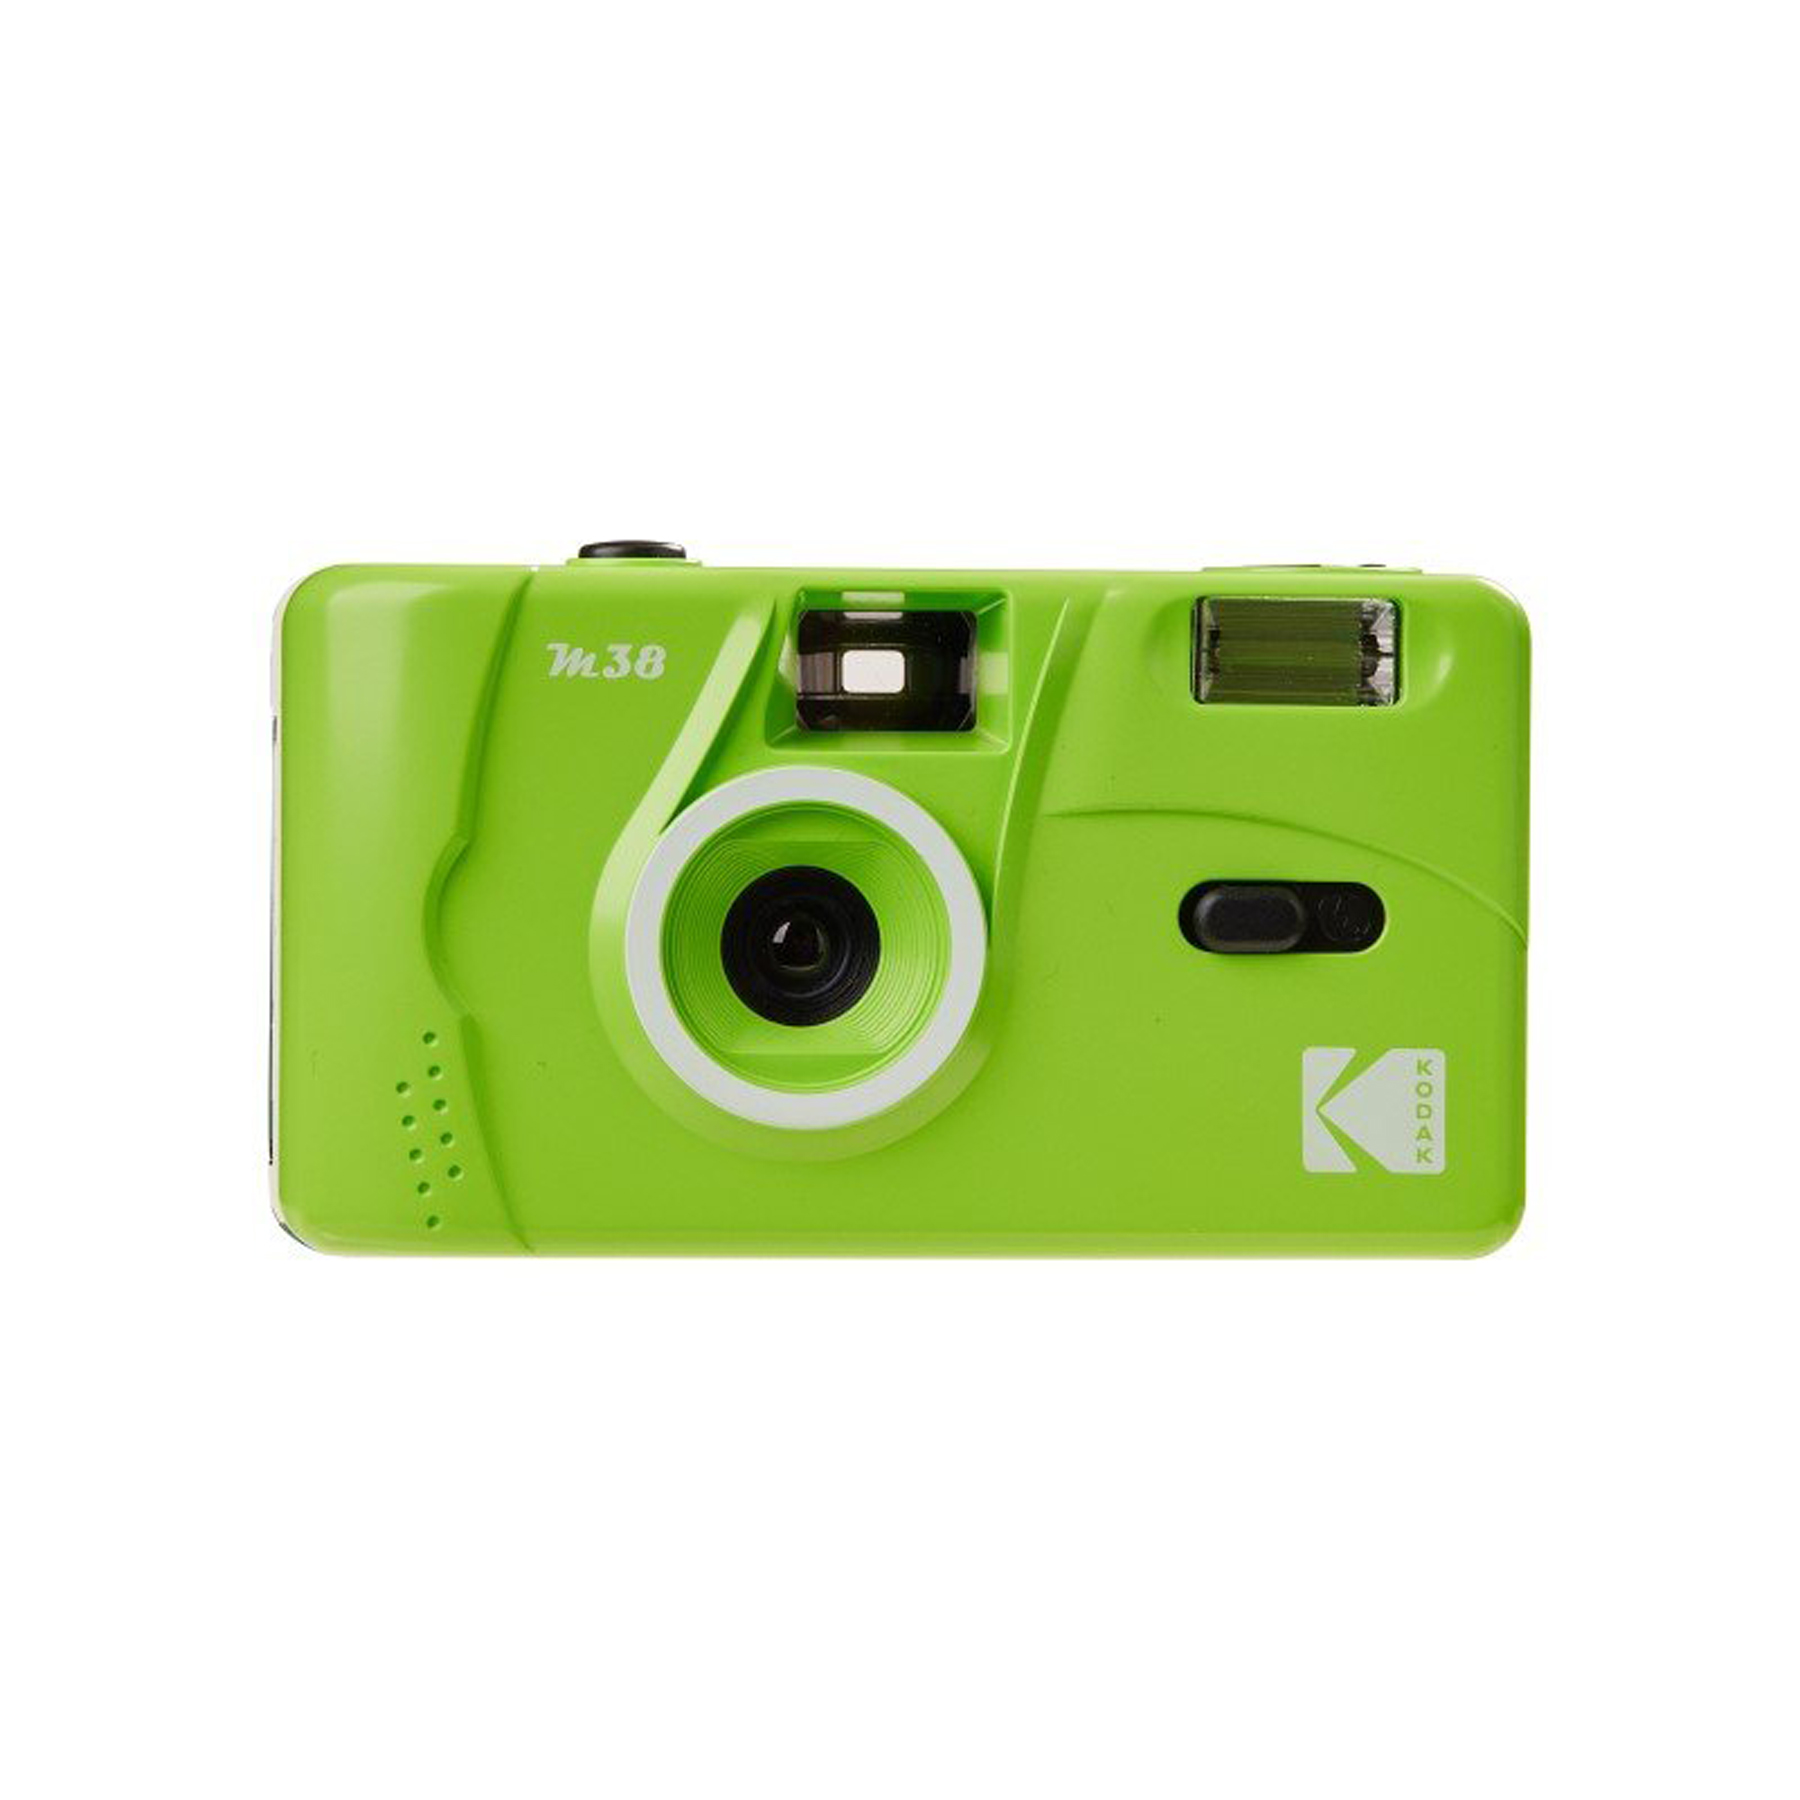 KODAK M38 – 35MM FILM CAMERA -FOCUS FREE, REUSABLE , BUILT IN FLASH , EASY TO USE – LIME GREEN